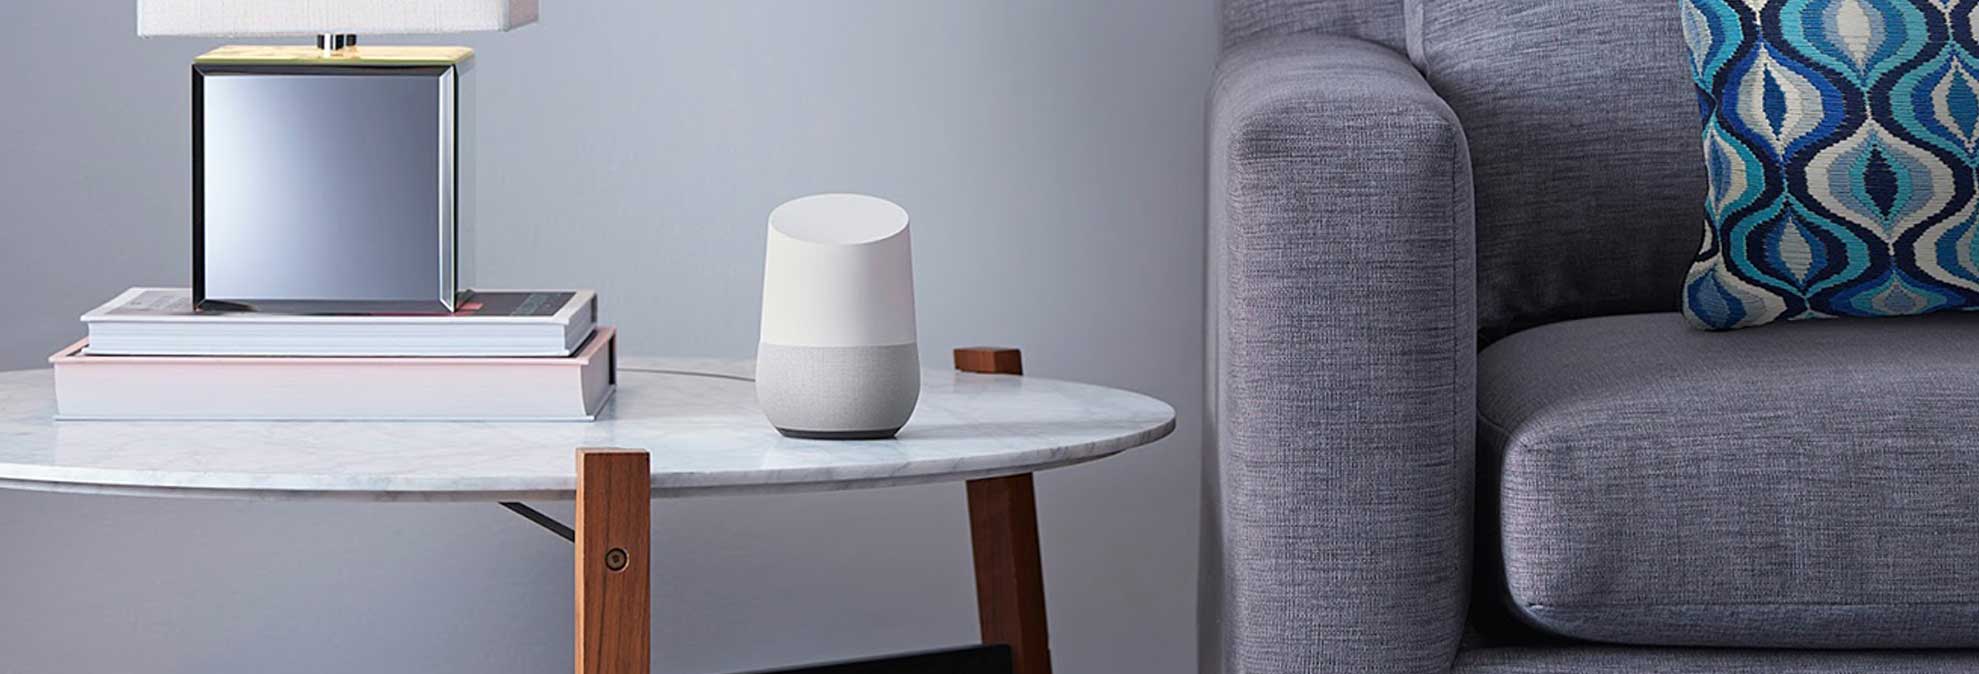 CR Electronics Hero Google's Awesome Home Speaker Assistant 05 16